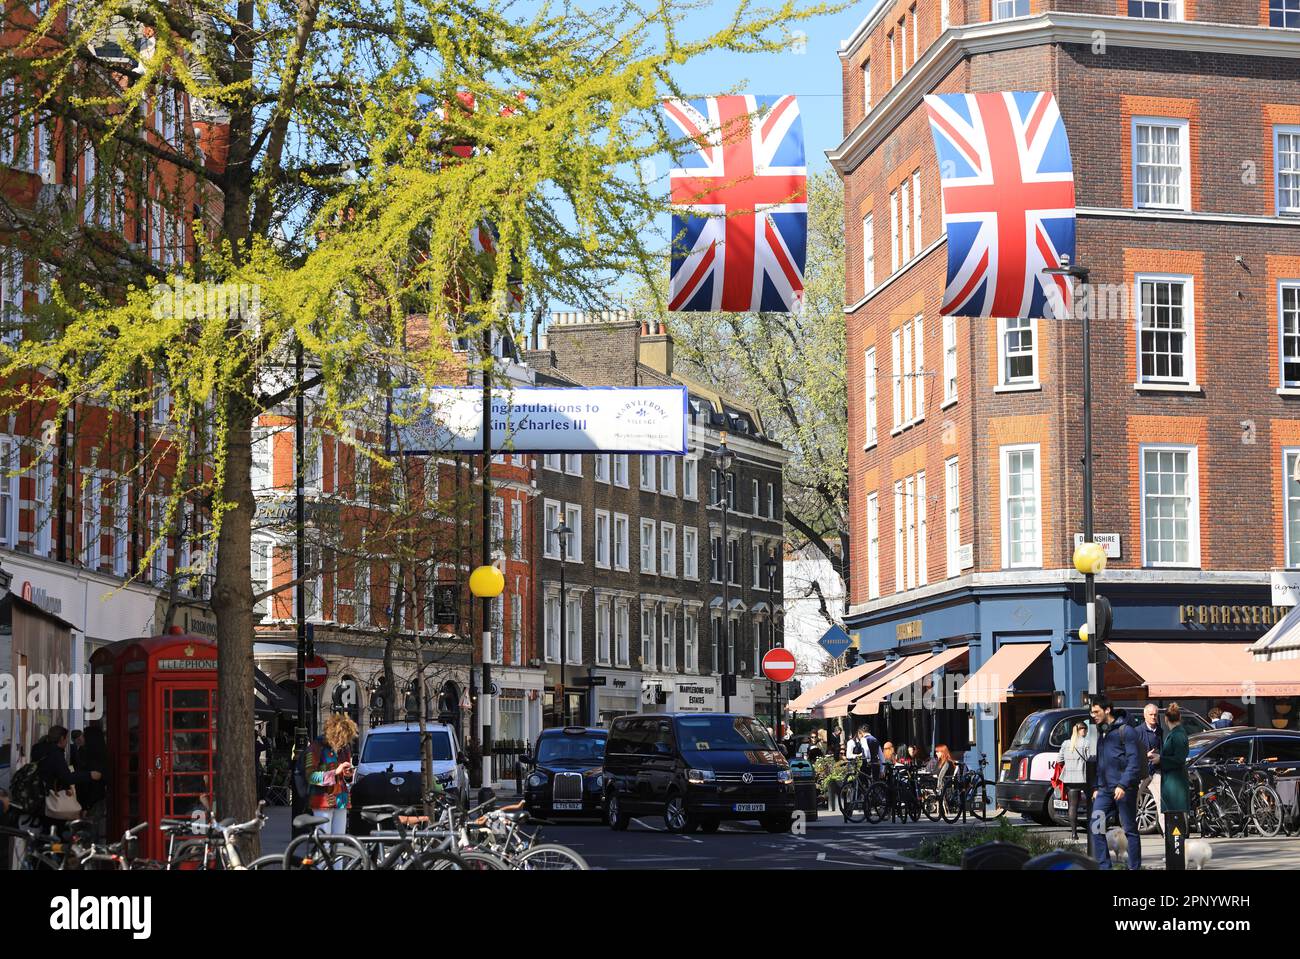 Getting ready for King Charles III's Coronation, the flags and bunting are up in Marylebone, central London, UK Stock Photo